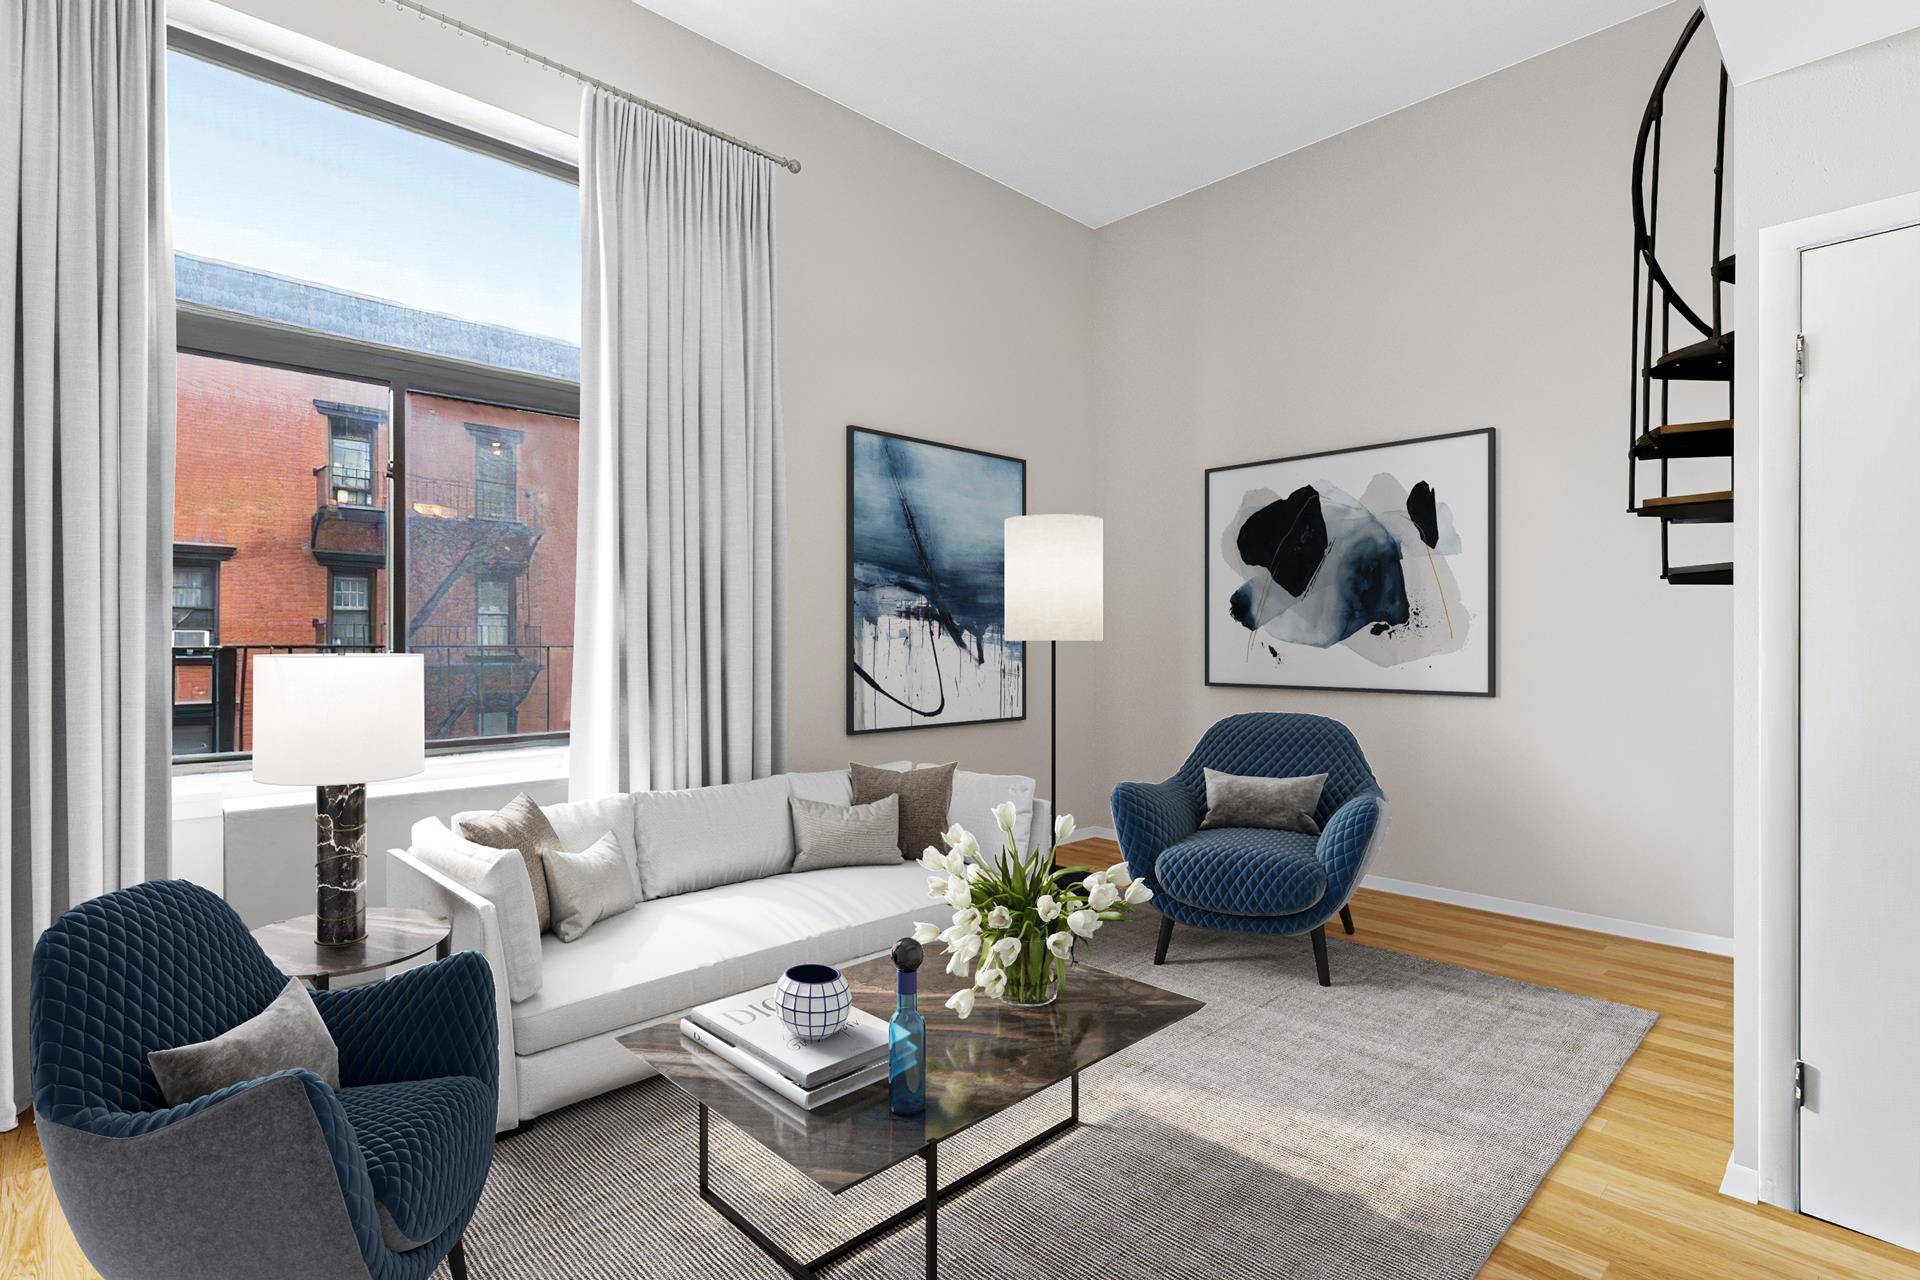 160 East 26th Street, 4C is an incredible, duplex residence with a premier location.